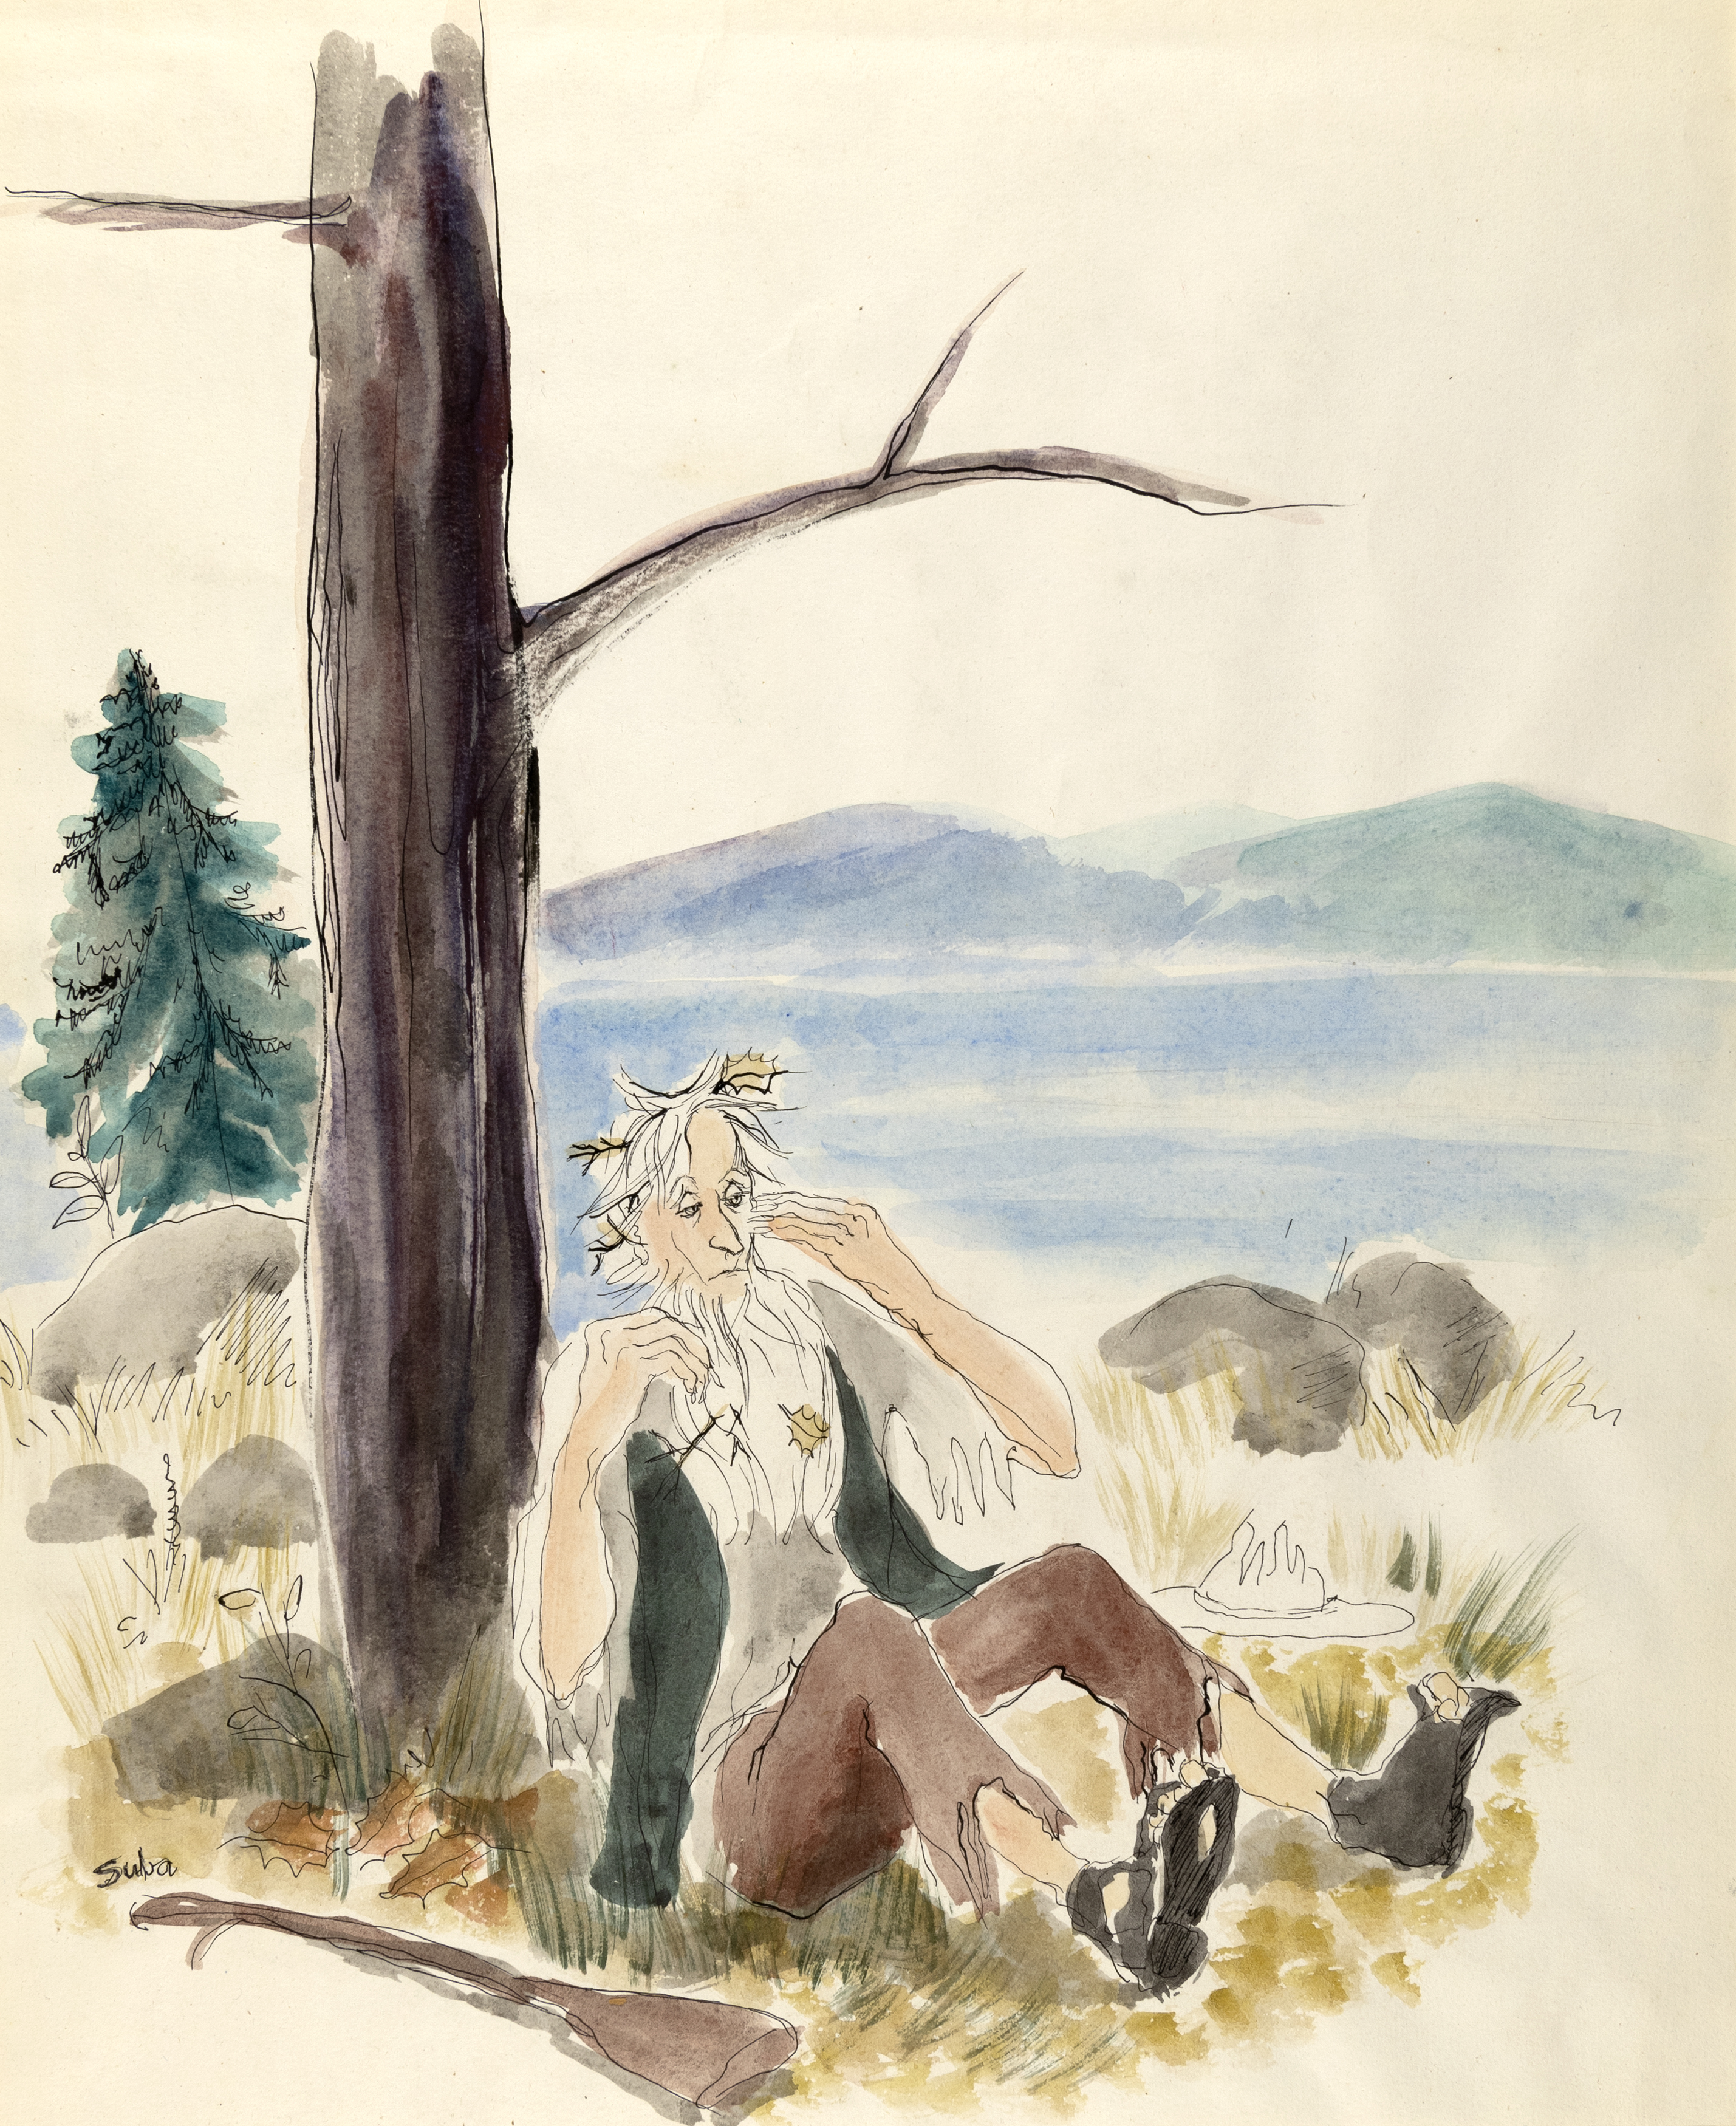 Illustration of man sitting next to tree with rifle. 